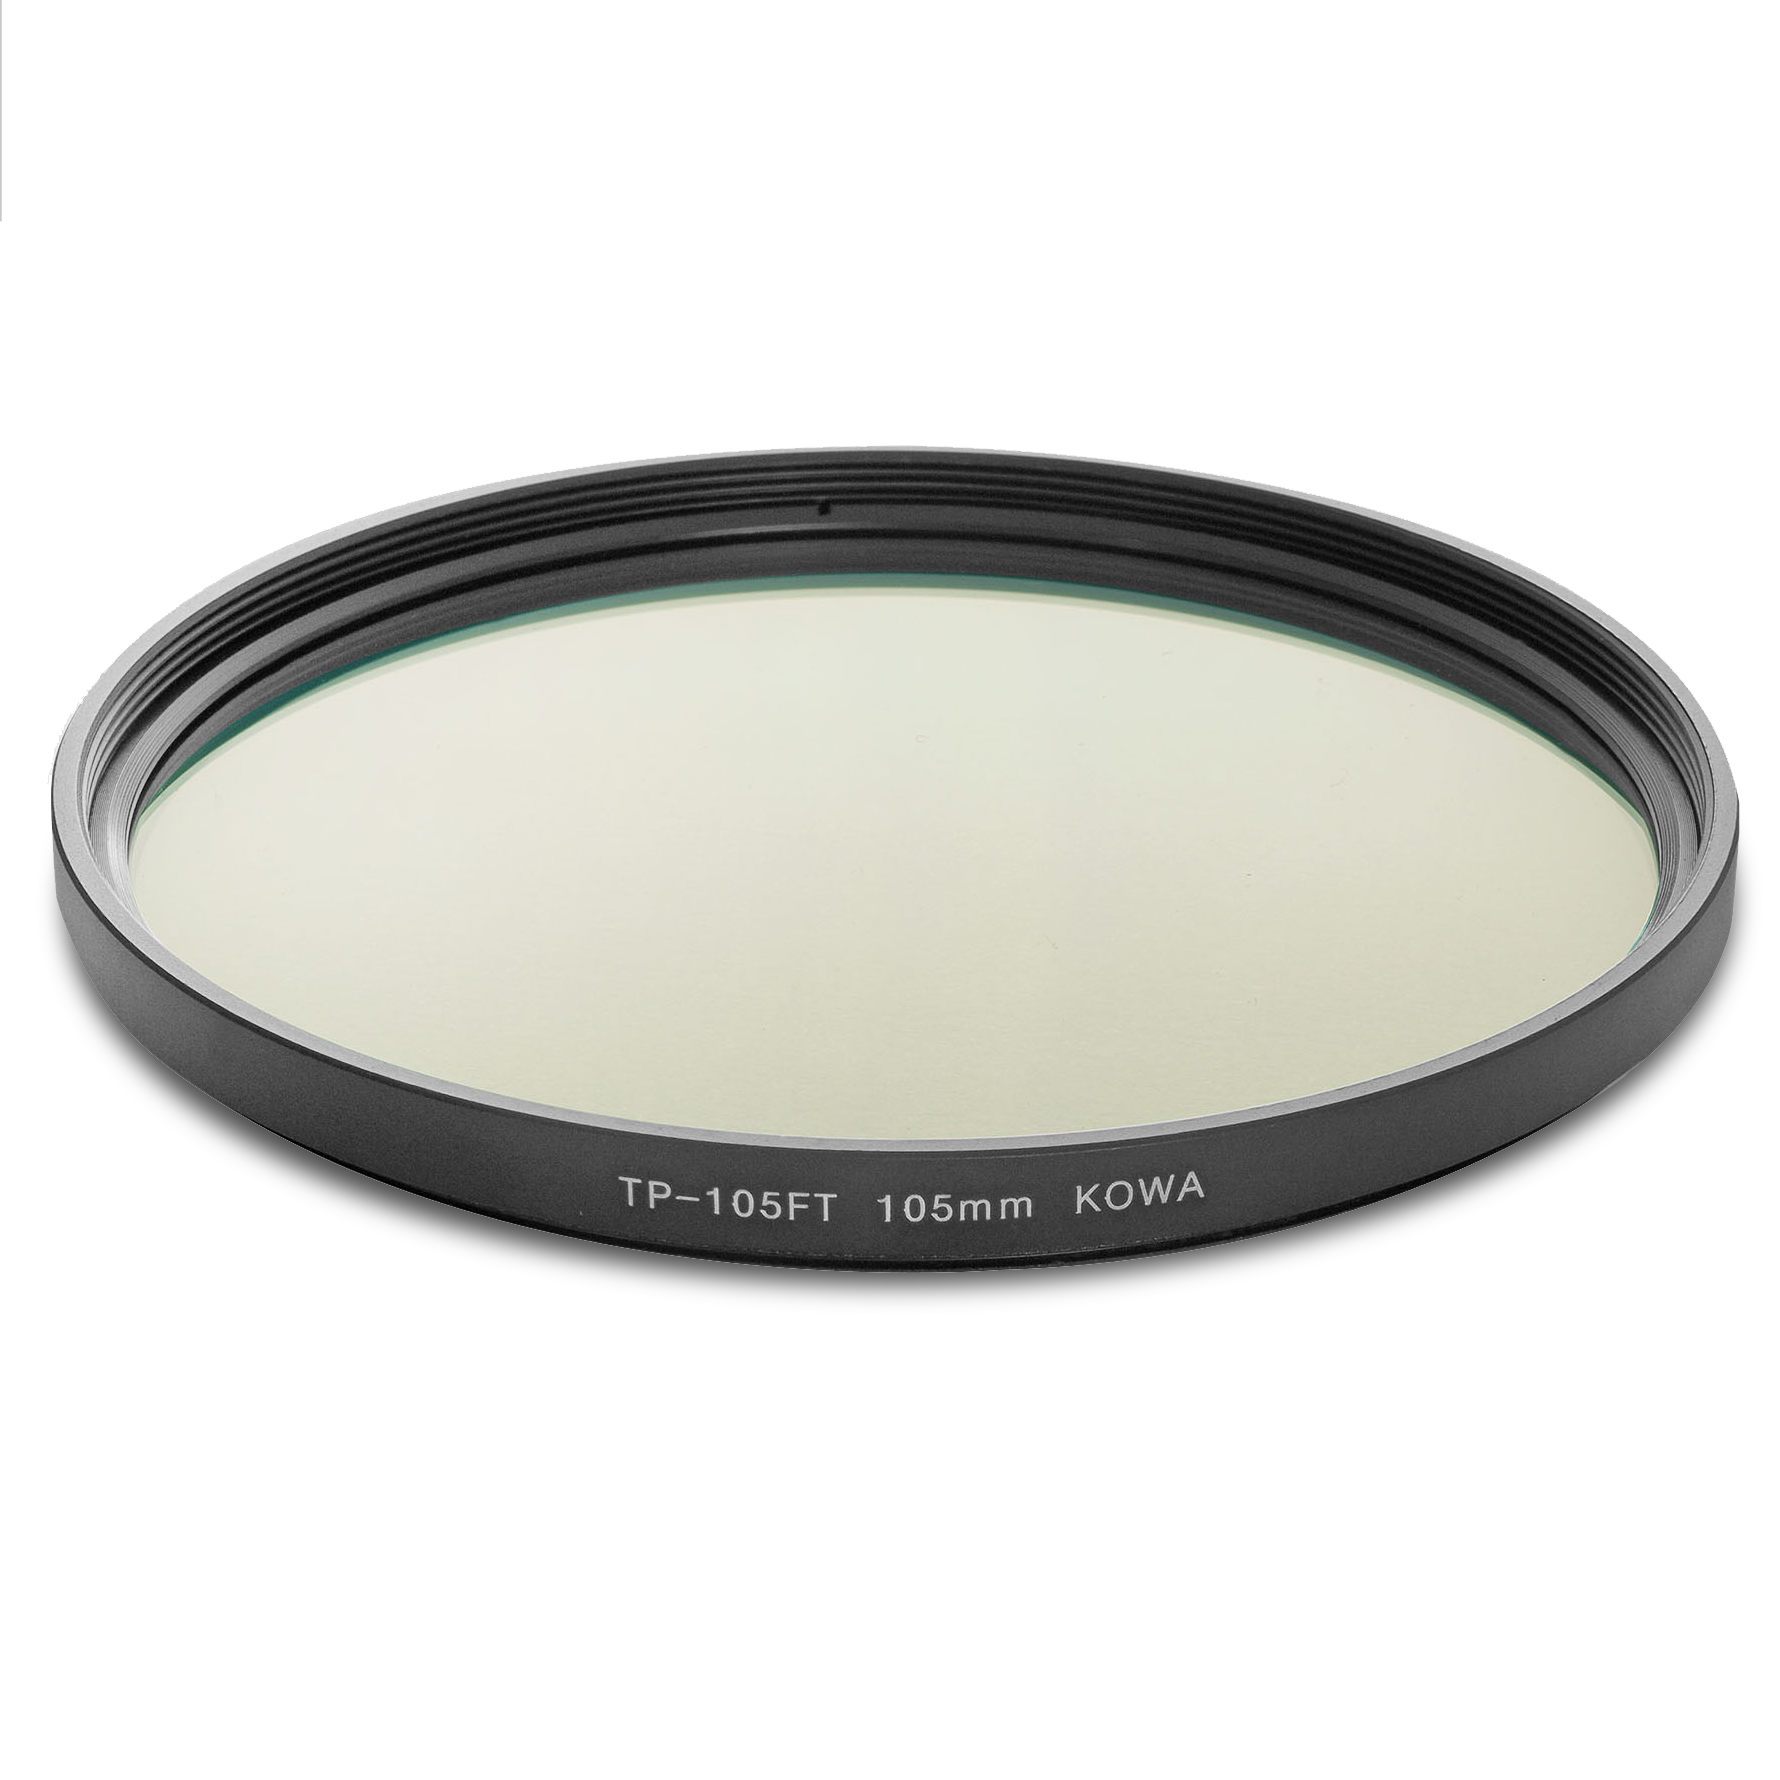 Kowa TP-105FT protective filter